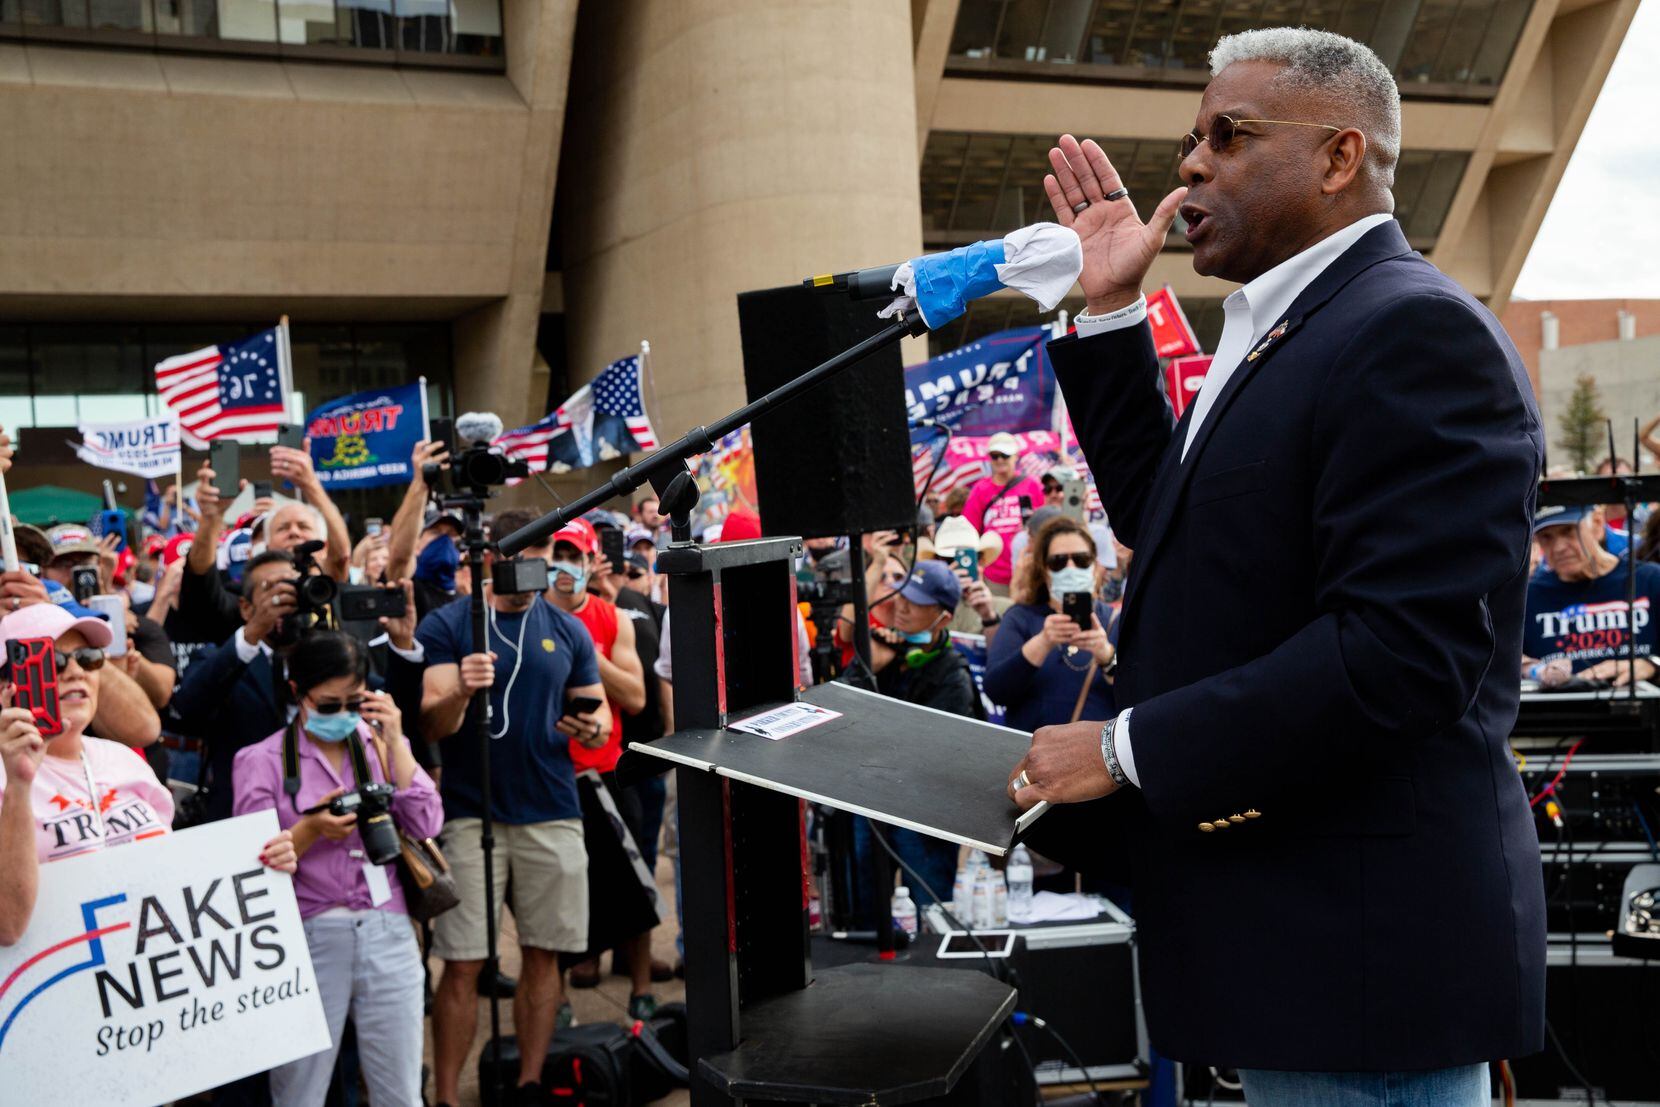 Allen West, chairman of the Republican Party of Texas, speaks during a Don't Steal the Vote rally in support of President Donald Trump in front of Dallas City Hall on Saturday, Nov. 14, 2020. (Juan Figueroa/ The Dallas Morning News)